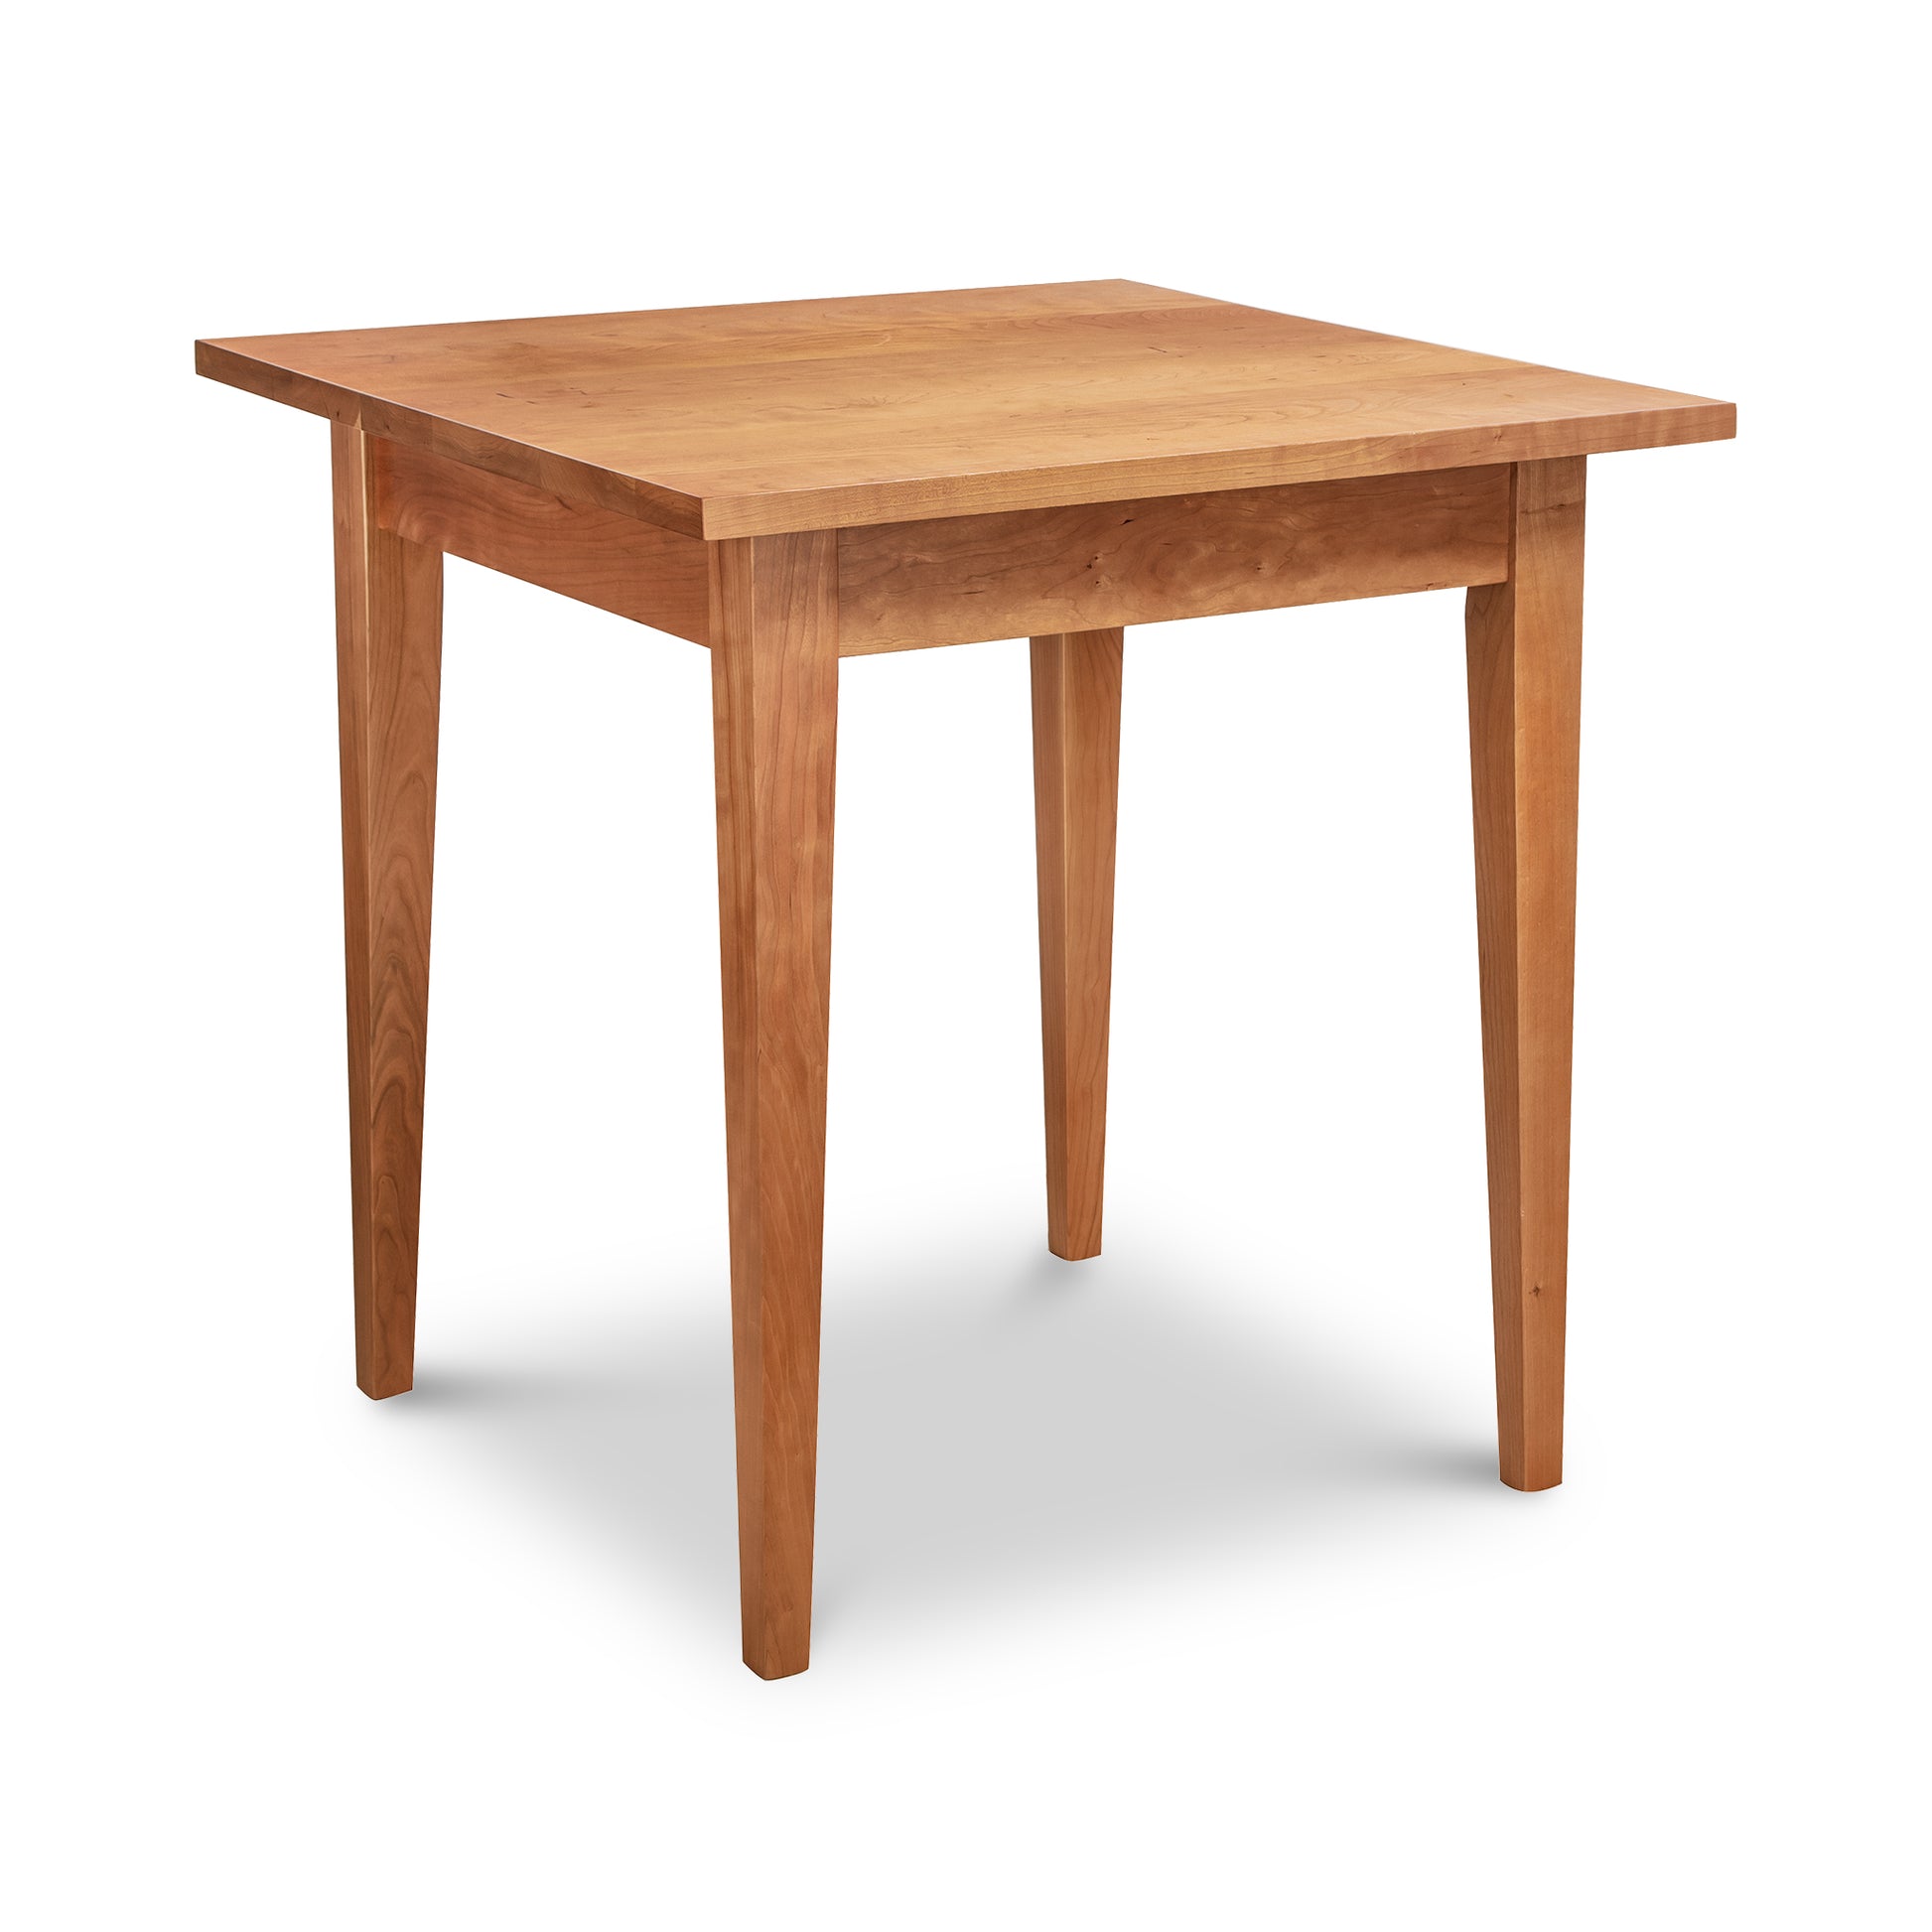 A square wooden table on a white background.